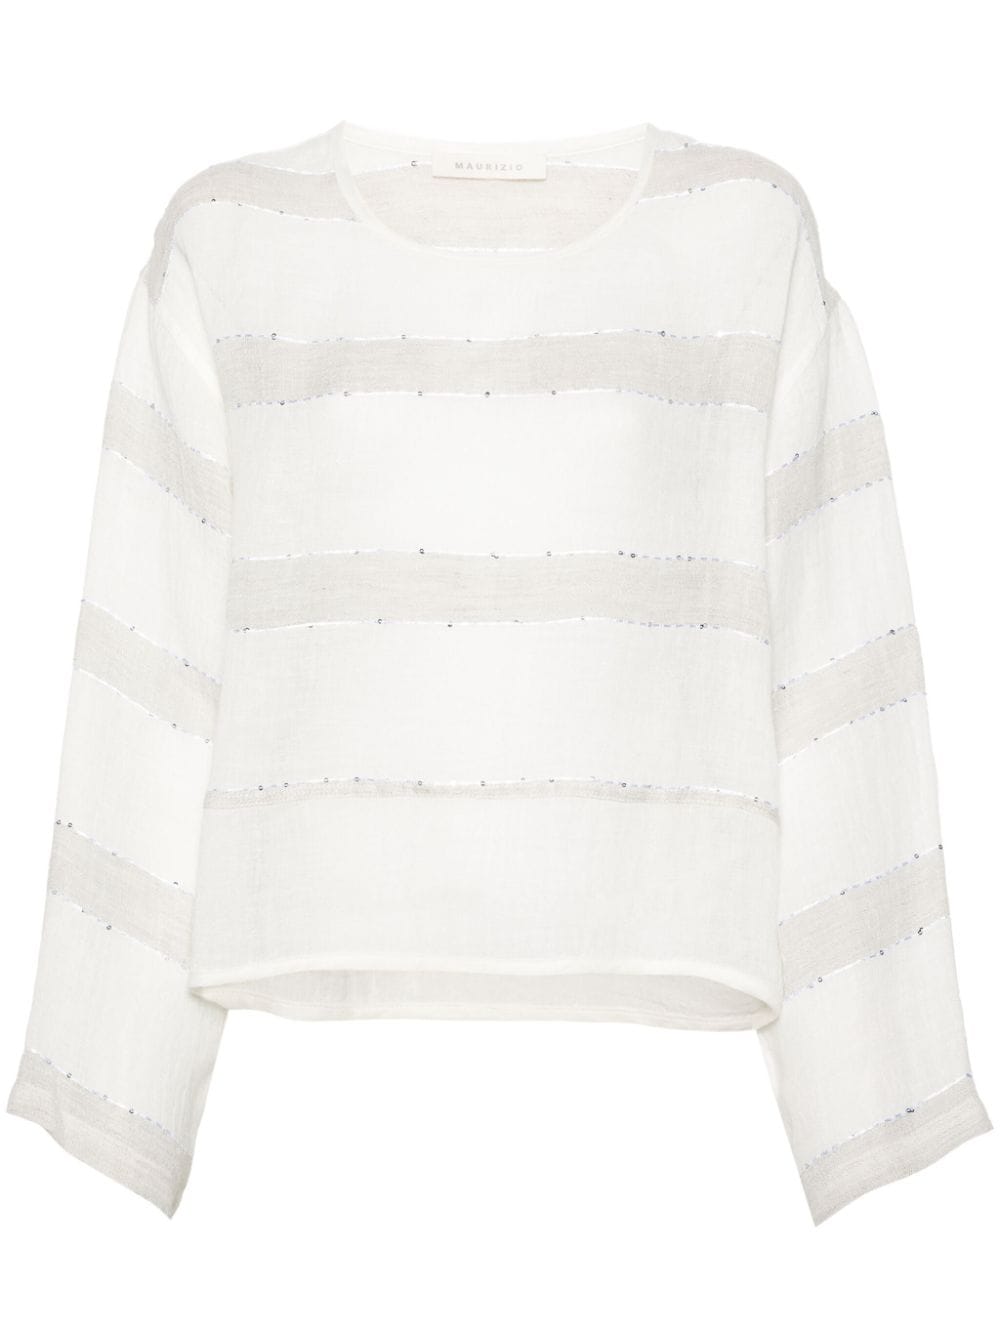 Maurizio Mykonos Striped Sequin Embellished Blouse In White